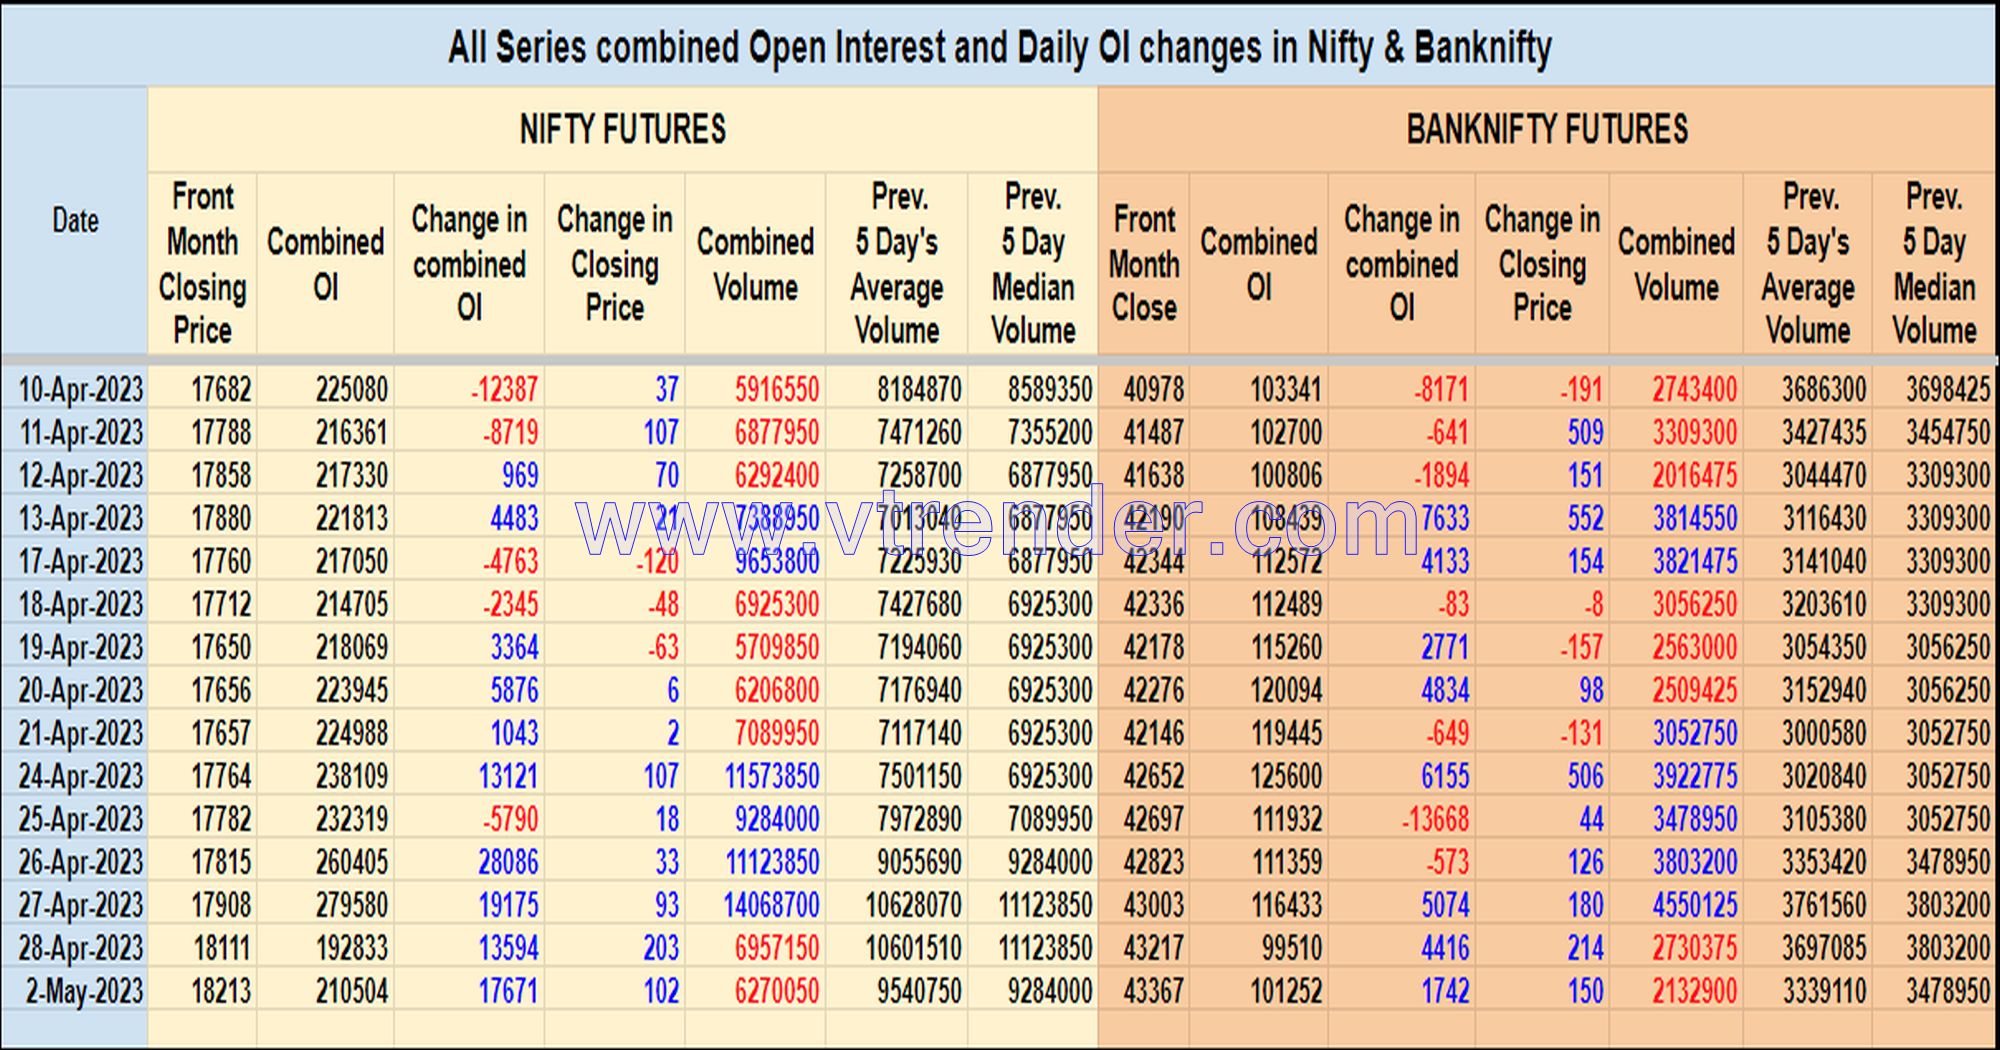 Oi02May Nifty And Banknifty Futures With All Series Combined Open Interest – 2Nd May 2023 Banknifty, Nifty, Open Interest